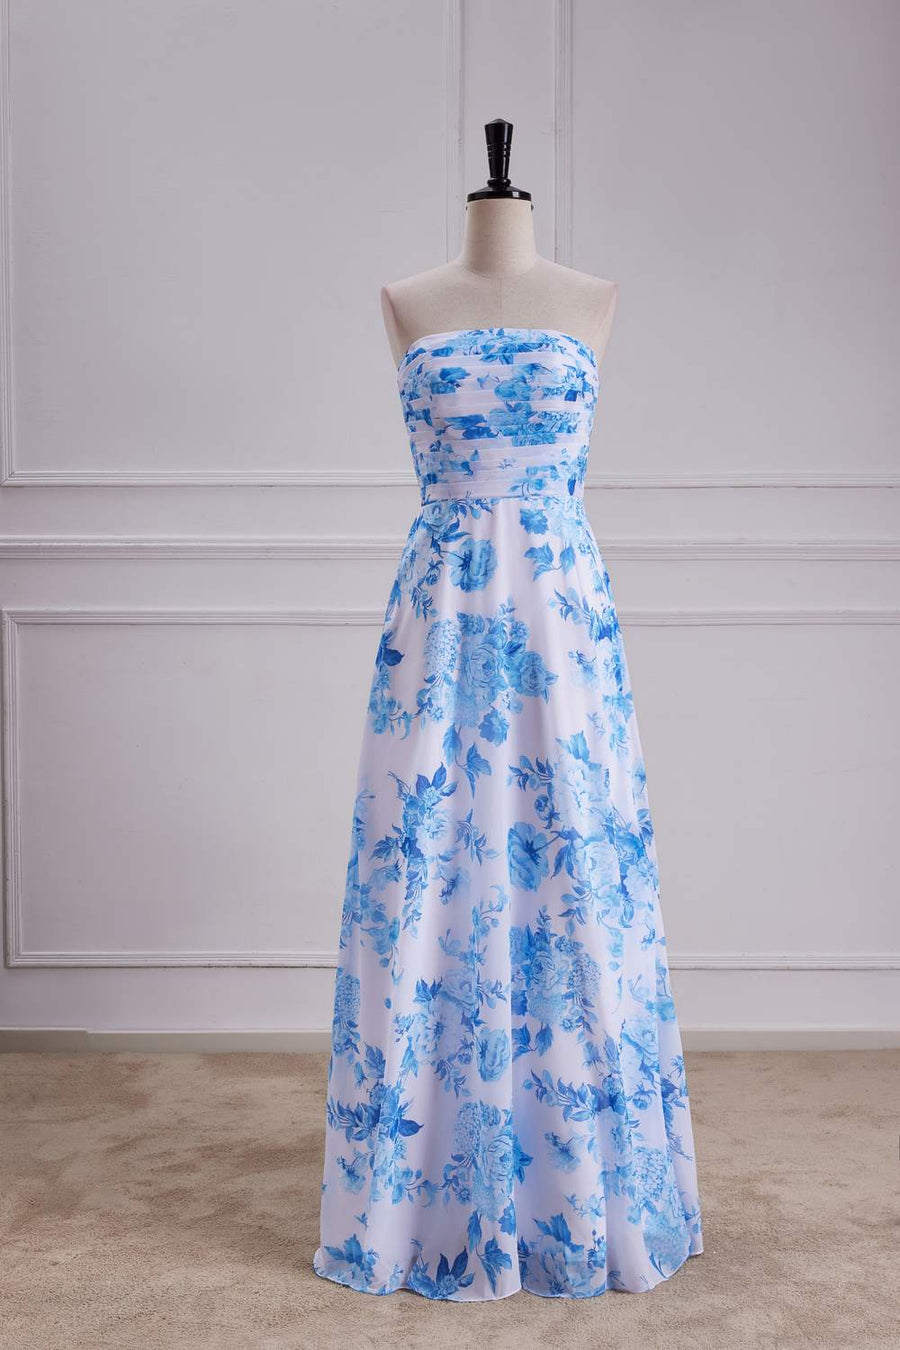 Blue Floral Strapless A-line Long Bridesmaid Dress front side full shot